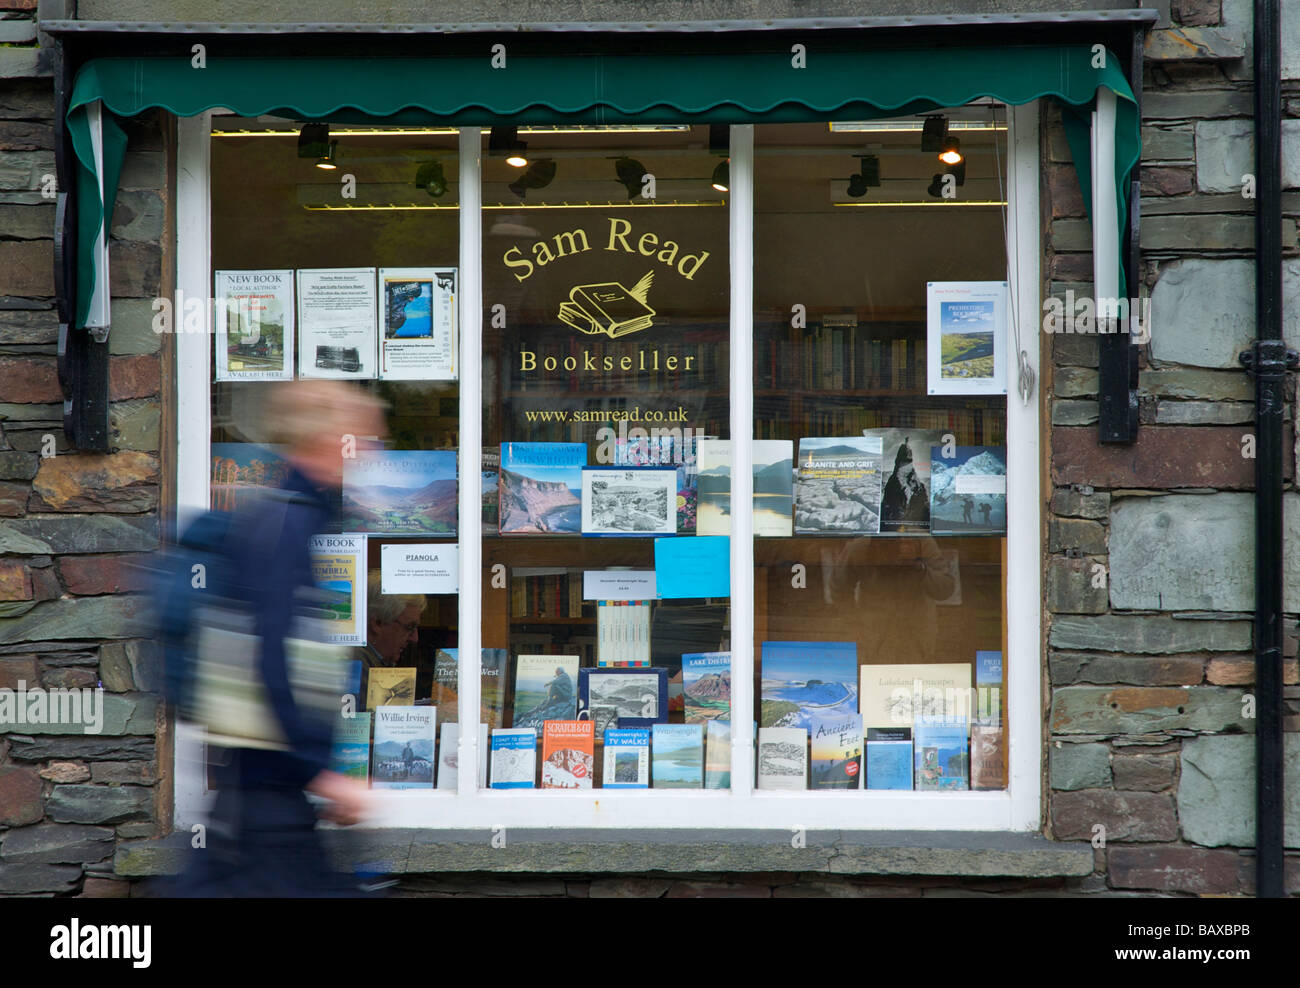 Window of shop - Sam Read, Bookseller - in Grasmere village, Lake District National Park, Cumbria, England UK Stock Photo